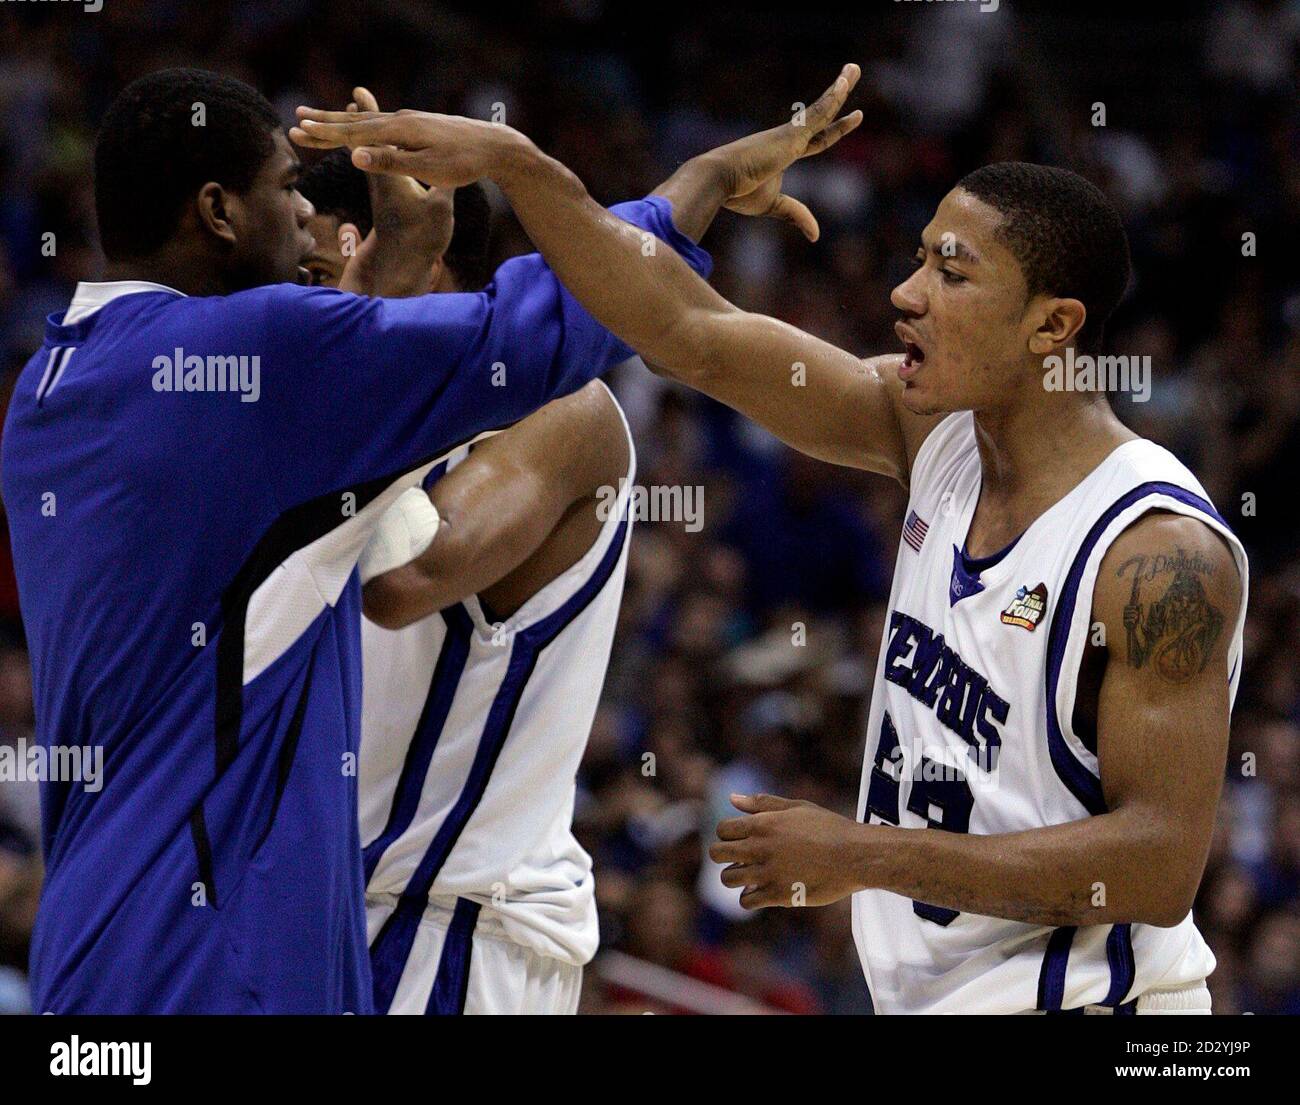 Memphis Tigers Derrick Rose (R) slaps hands with teammates during the  second half of their NCAA Men's Final Four championship basketball game  against the Kansas Jayhawks in San Antonio, Texas, April 7,